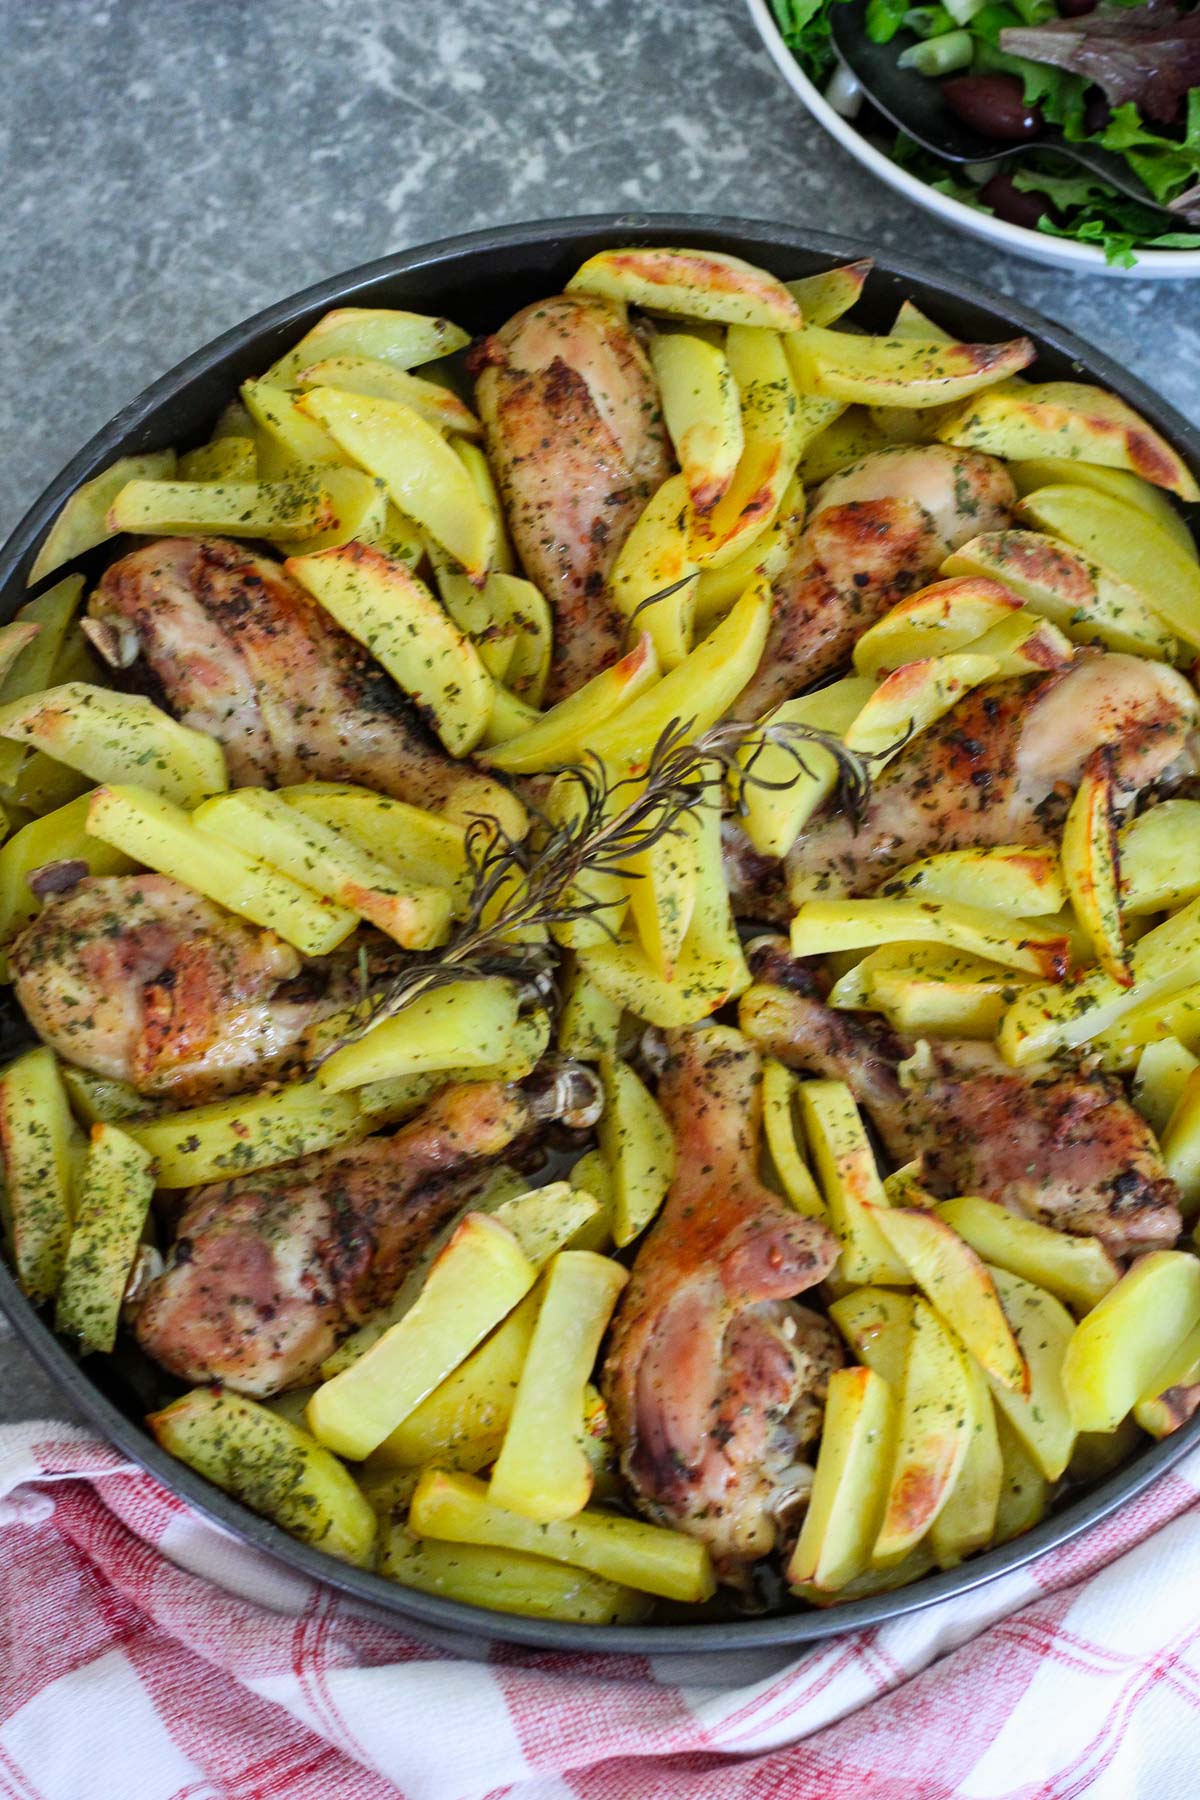 A round deep baking dish shown with baked potatoes and chicken drumsticks. Drumsticks are arranged in a circular pattern.